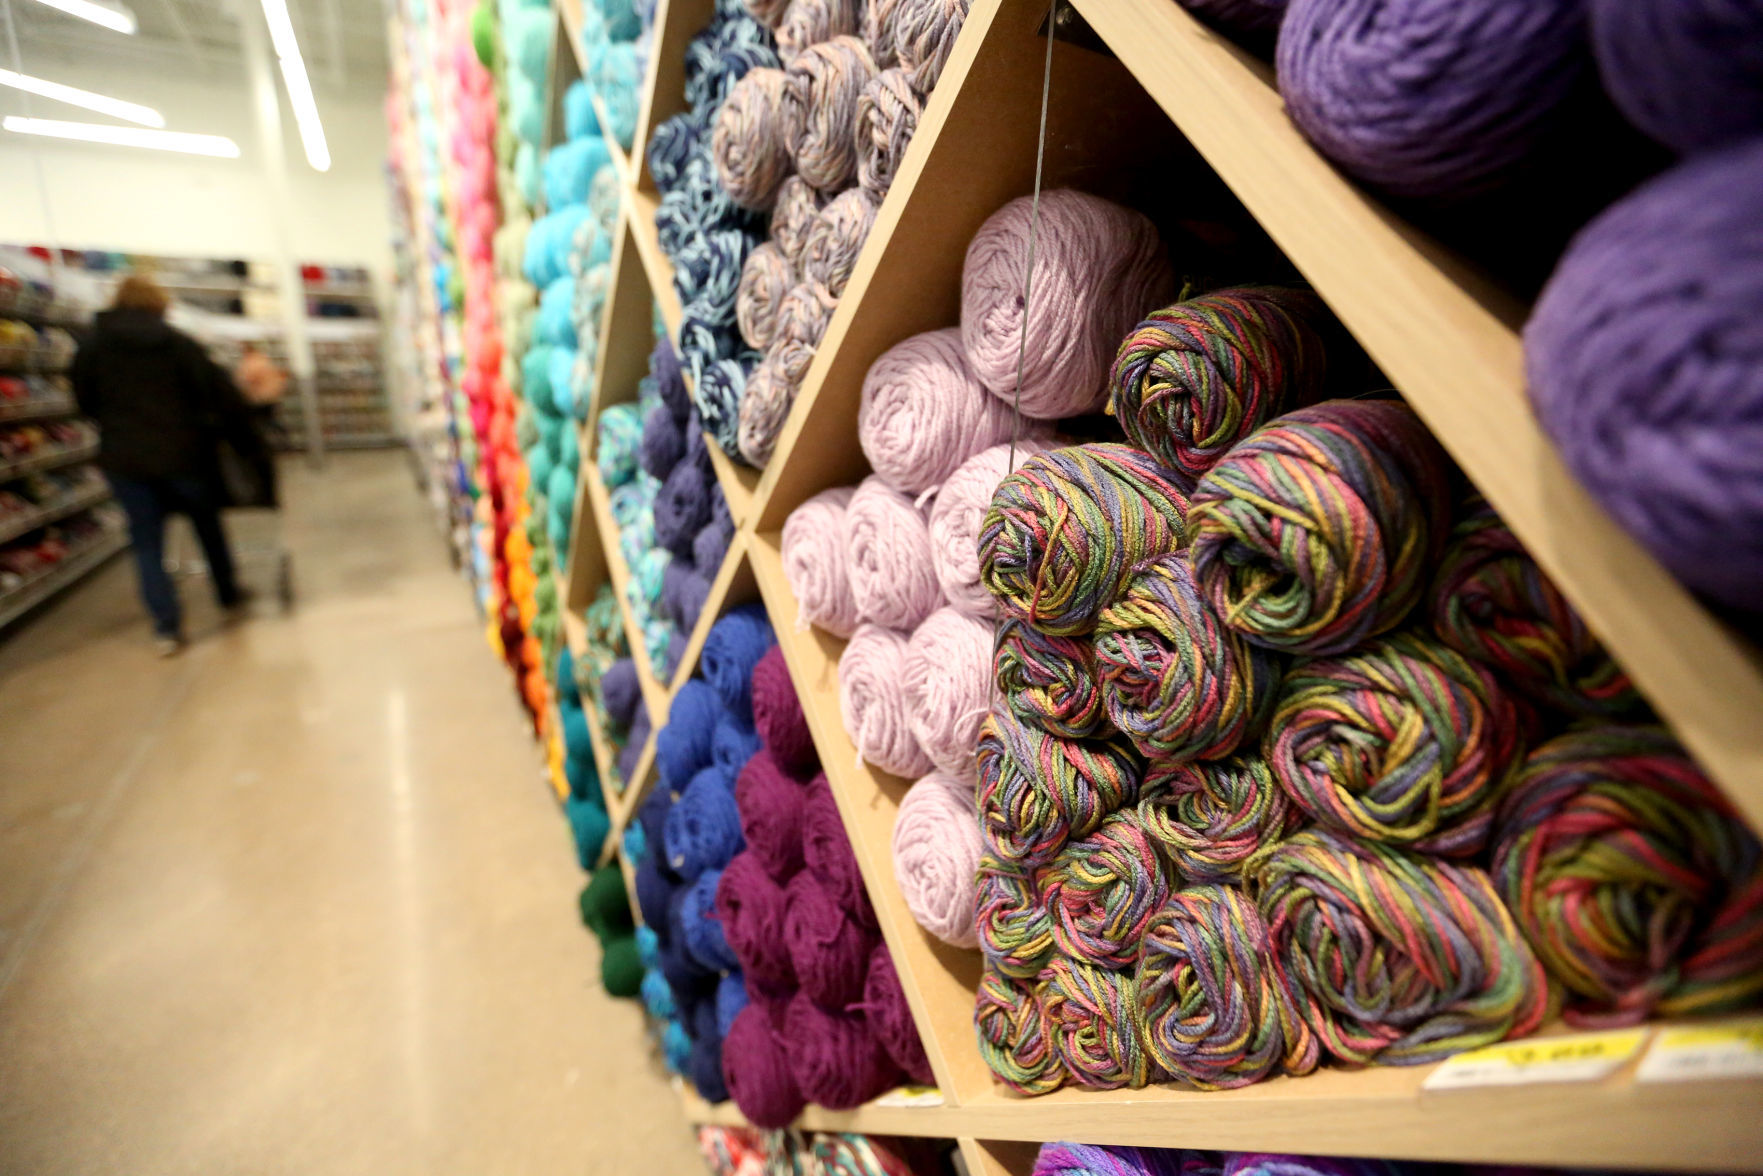 Yarn is displayed at JoAnn in Dubuque on Friday, Oct. 25, 2019. PHOTO CREDIT: JESSICA REILLY